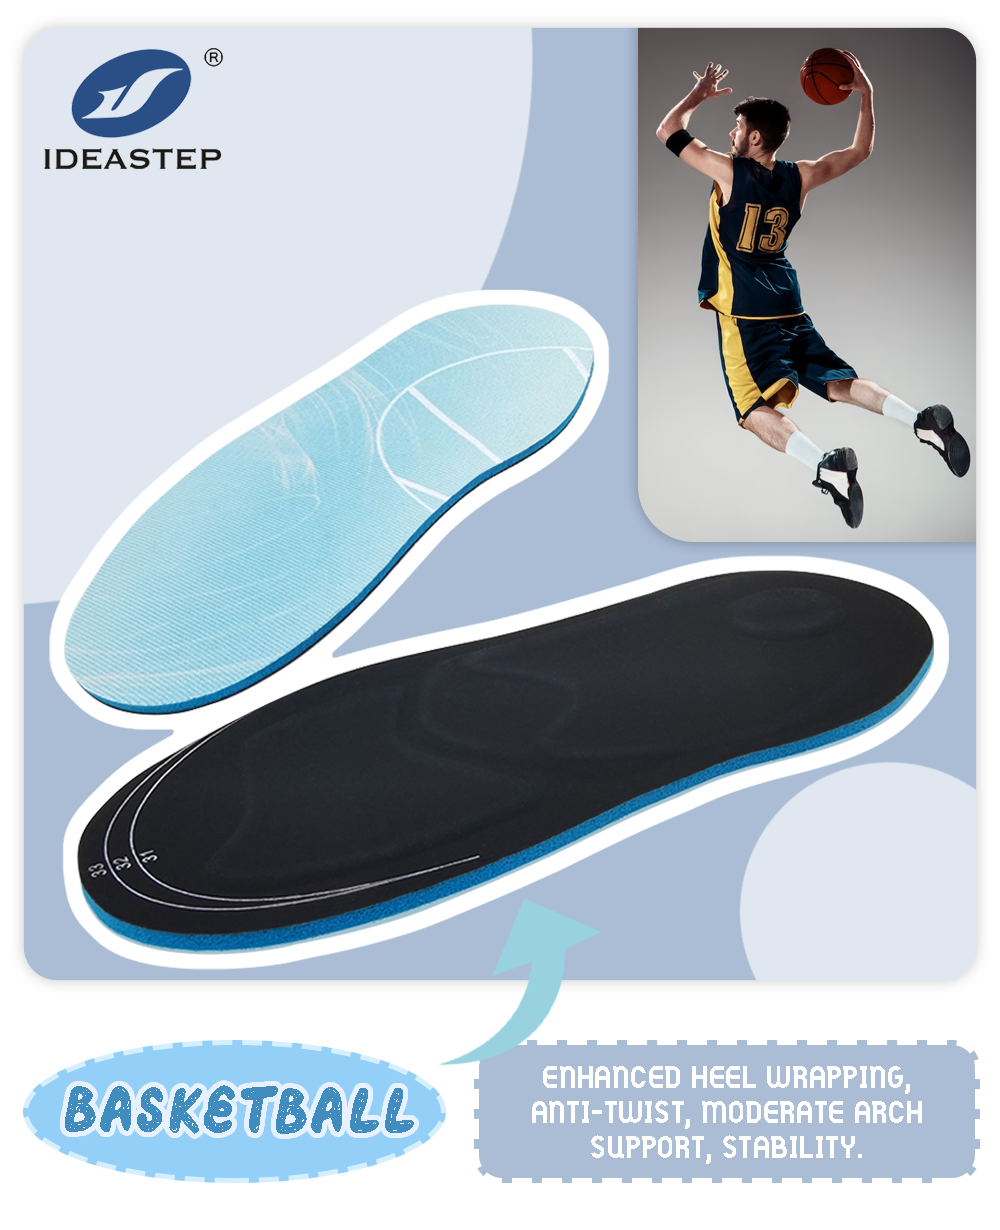 heat moldable insoles